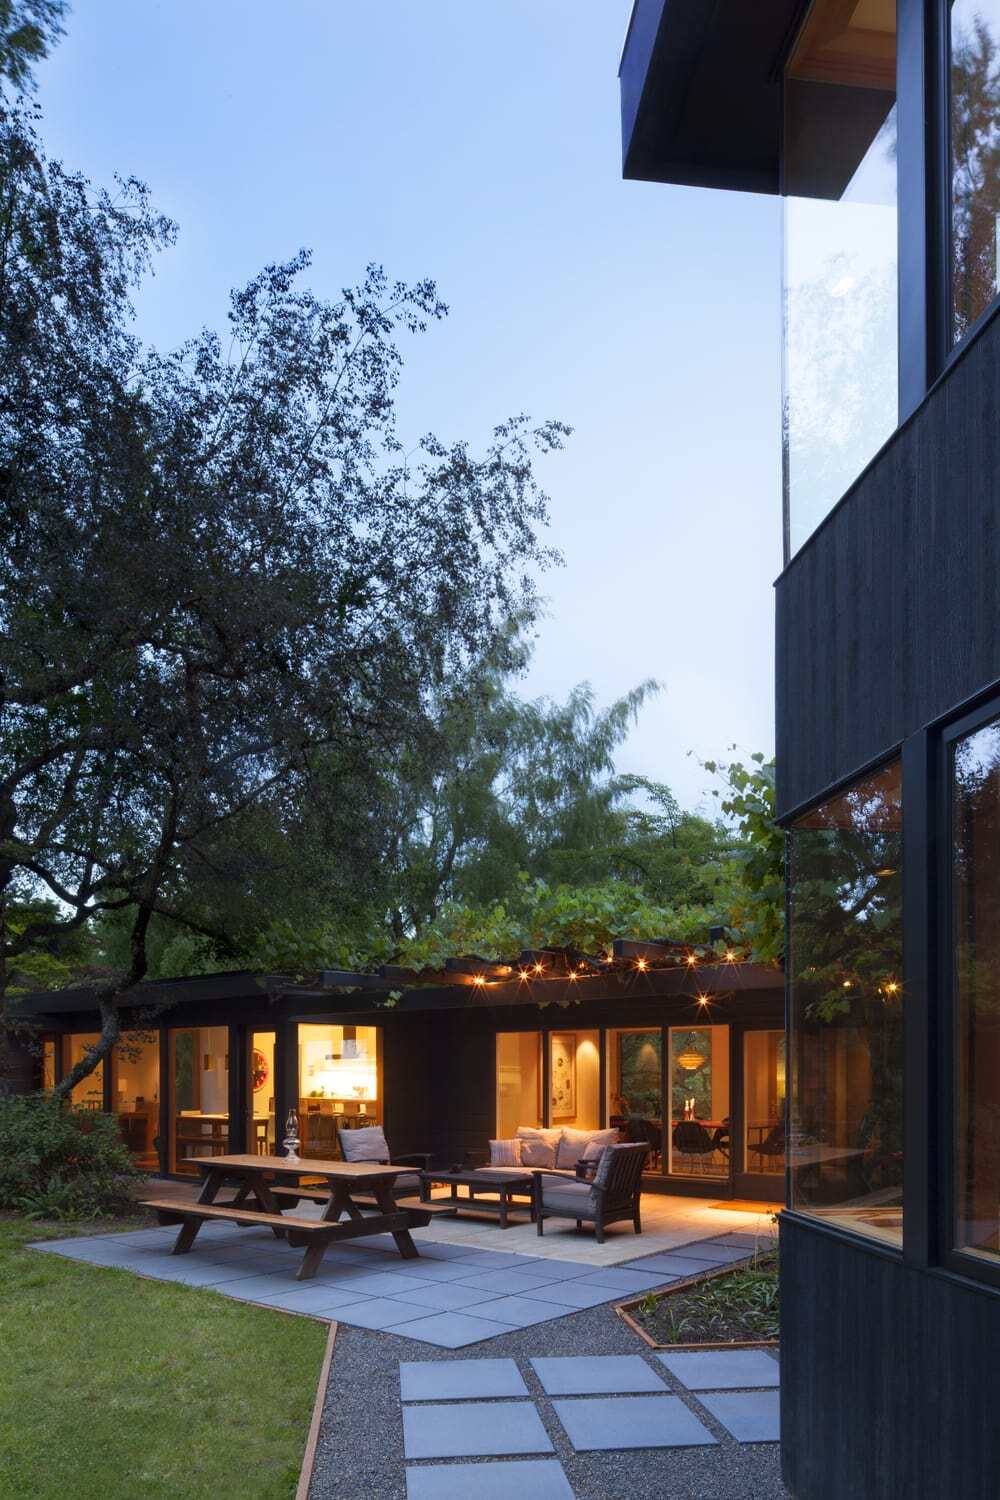 Meschter Residence by Skylab Architecture